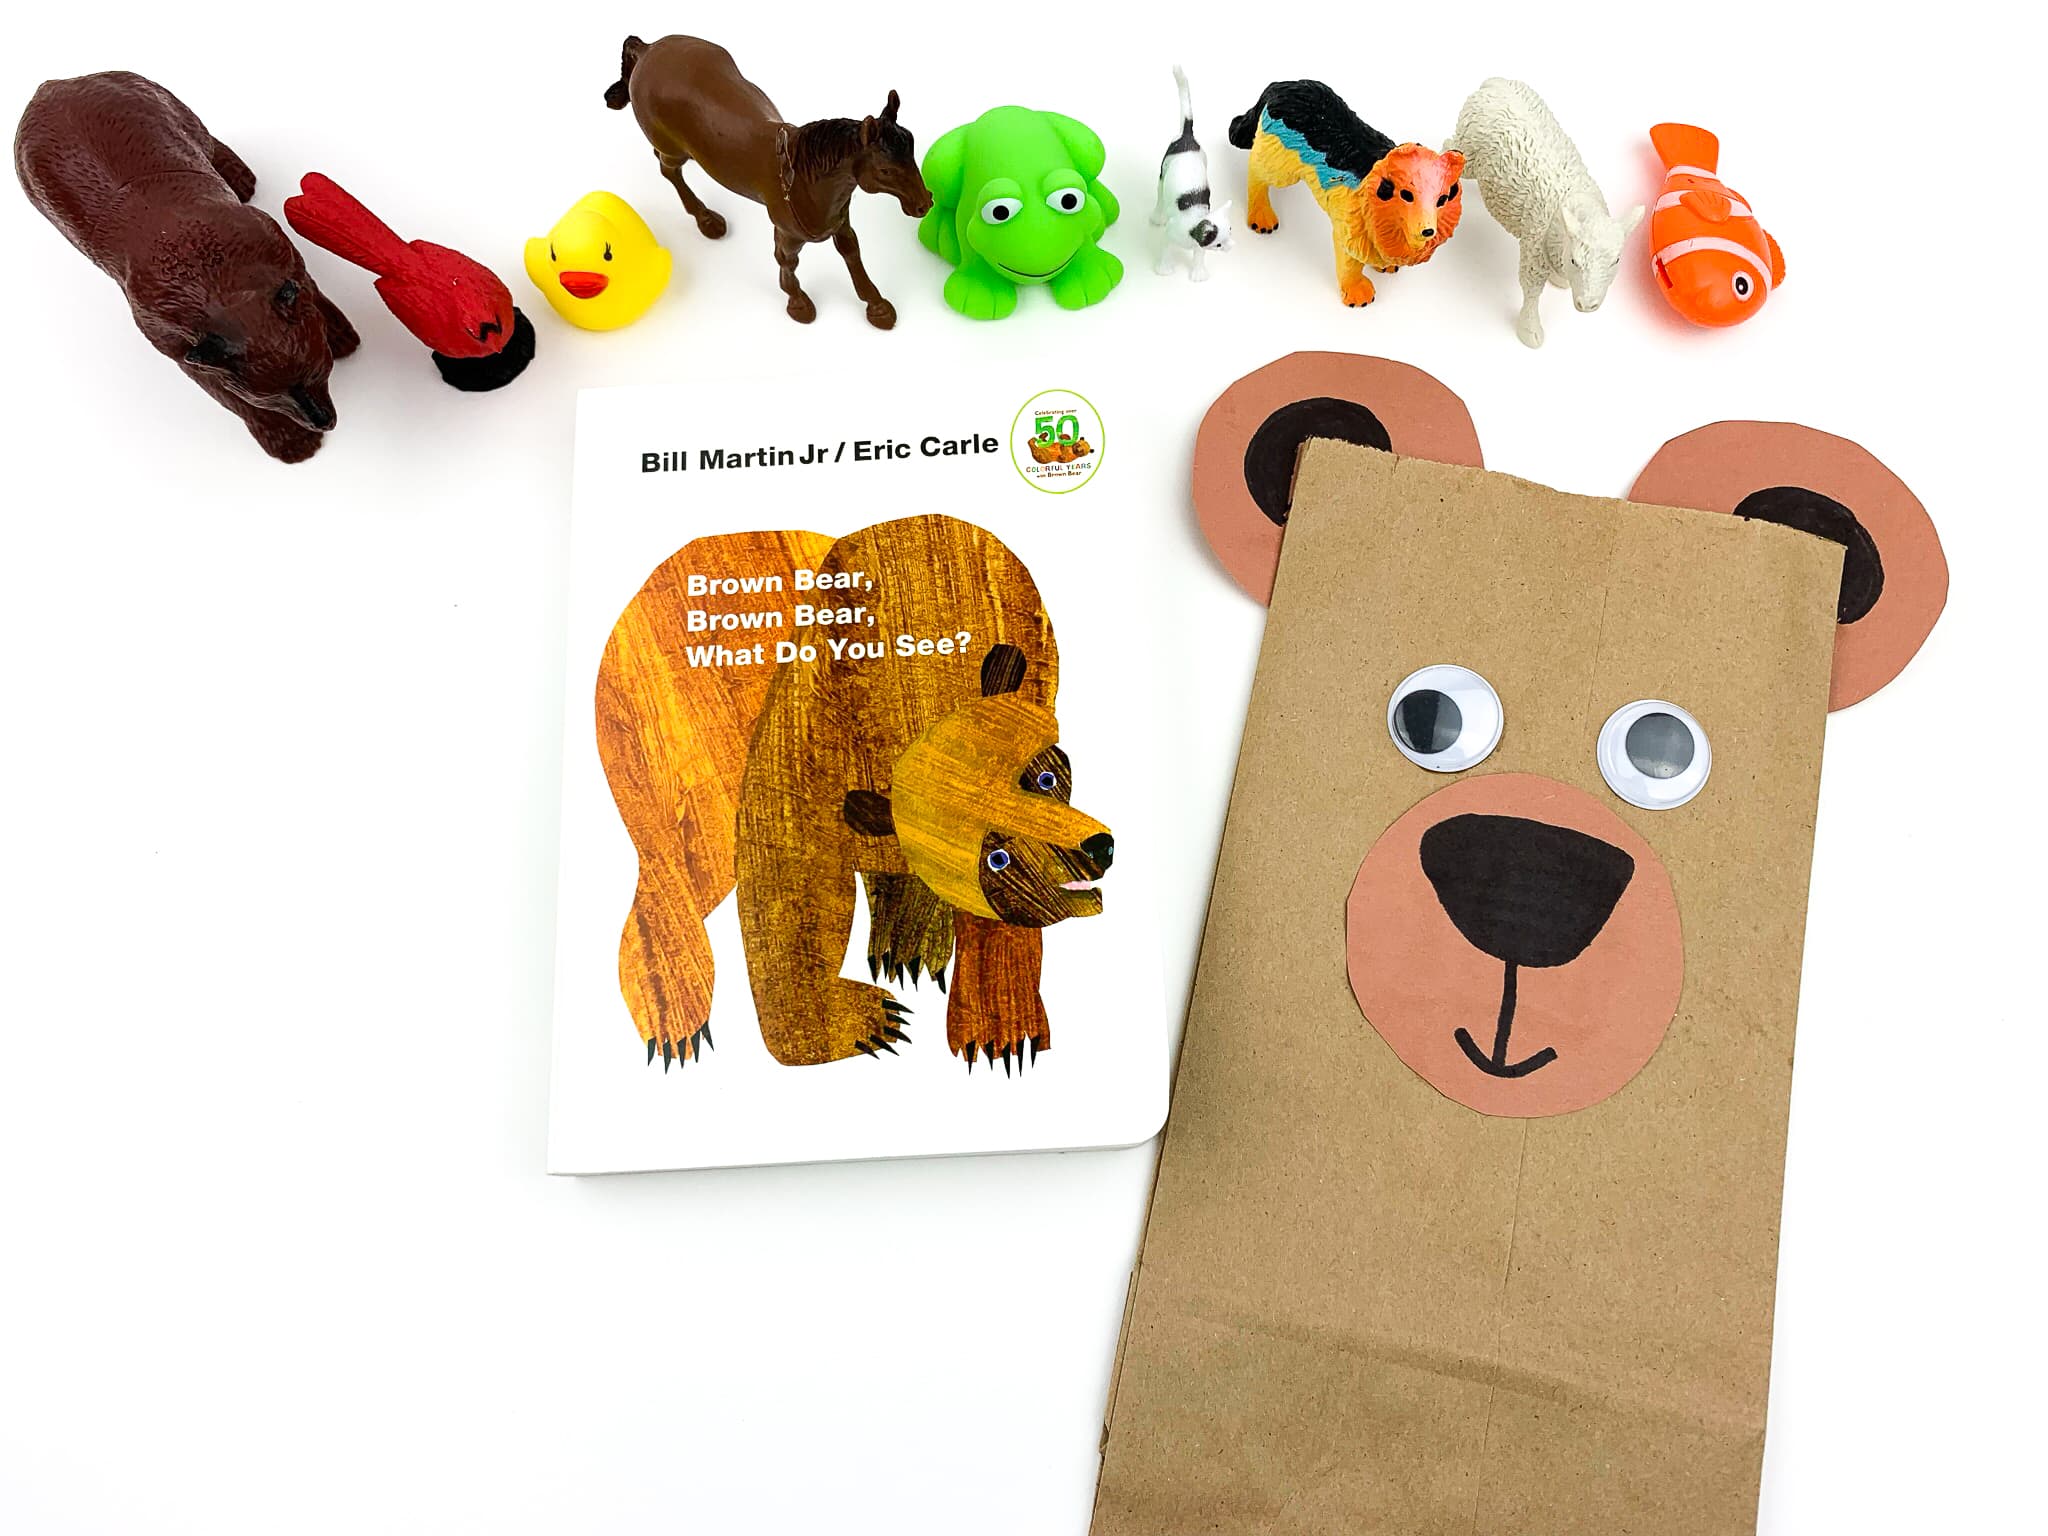 Completed Brown Bear Paper Bag with the Book Brown Bear and Animals to go along with the book!